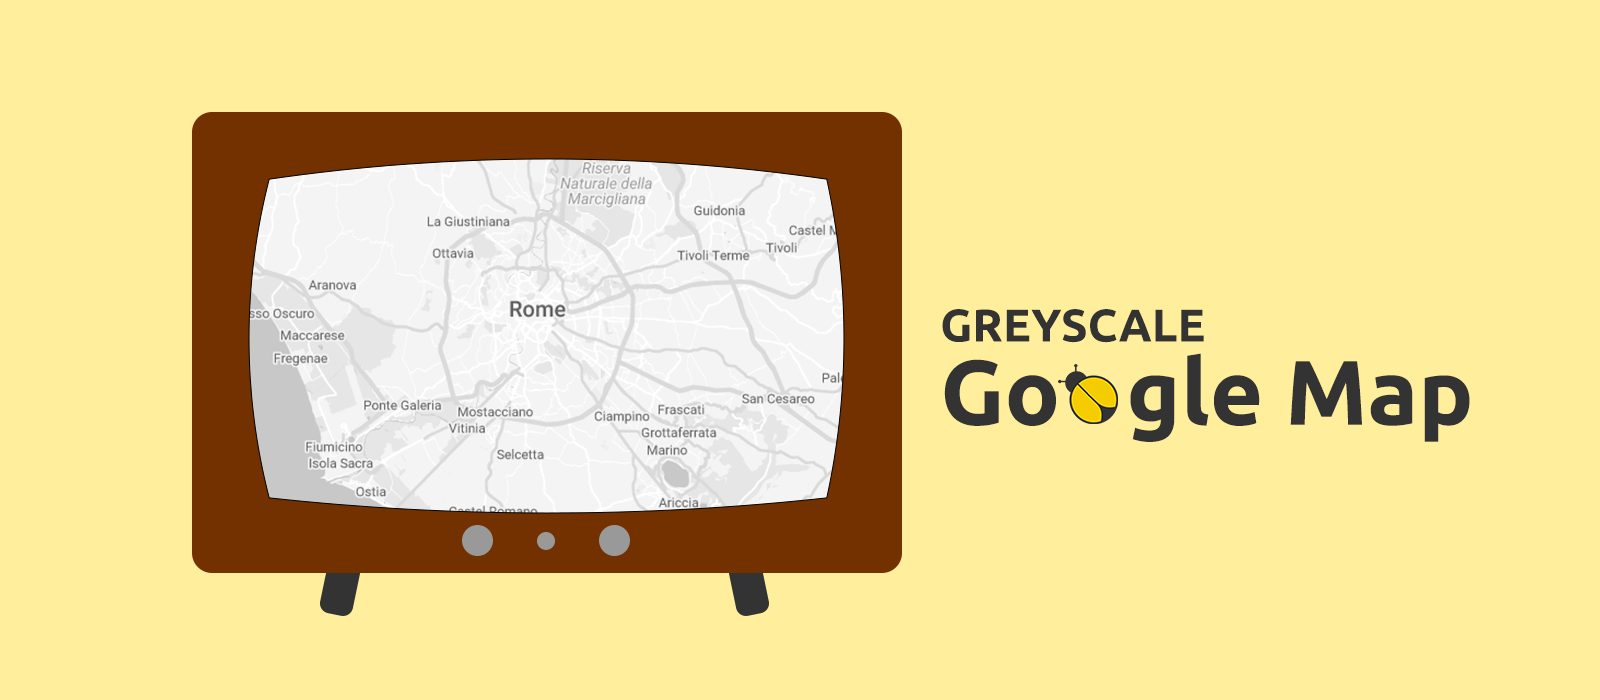 How to Give a Greyscale Touch to an Interactive or Static Google Map